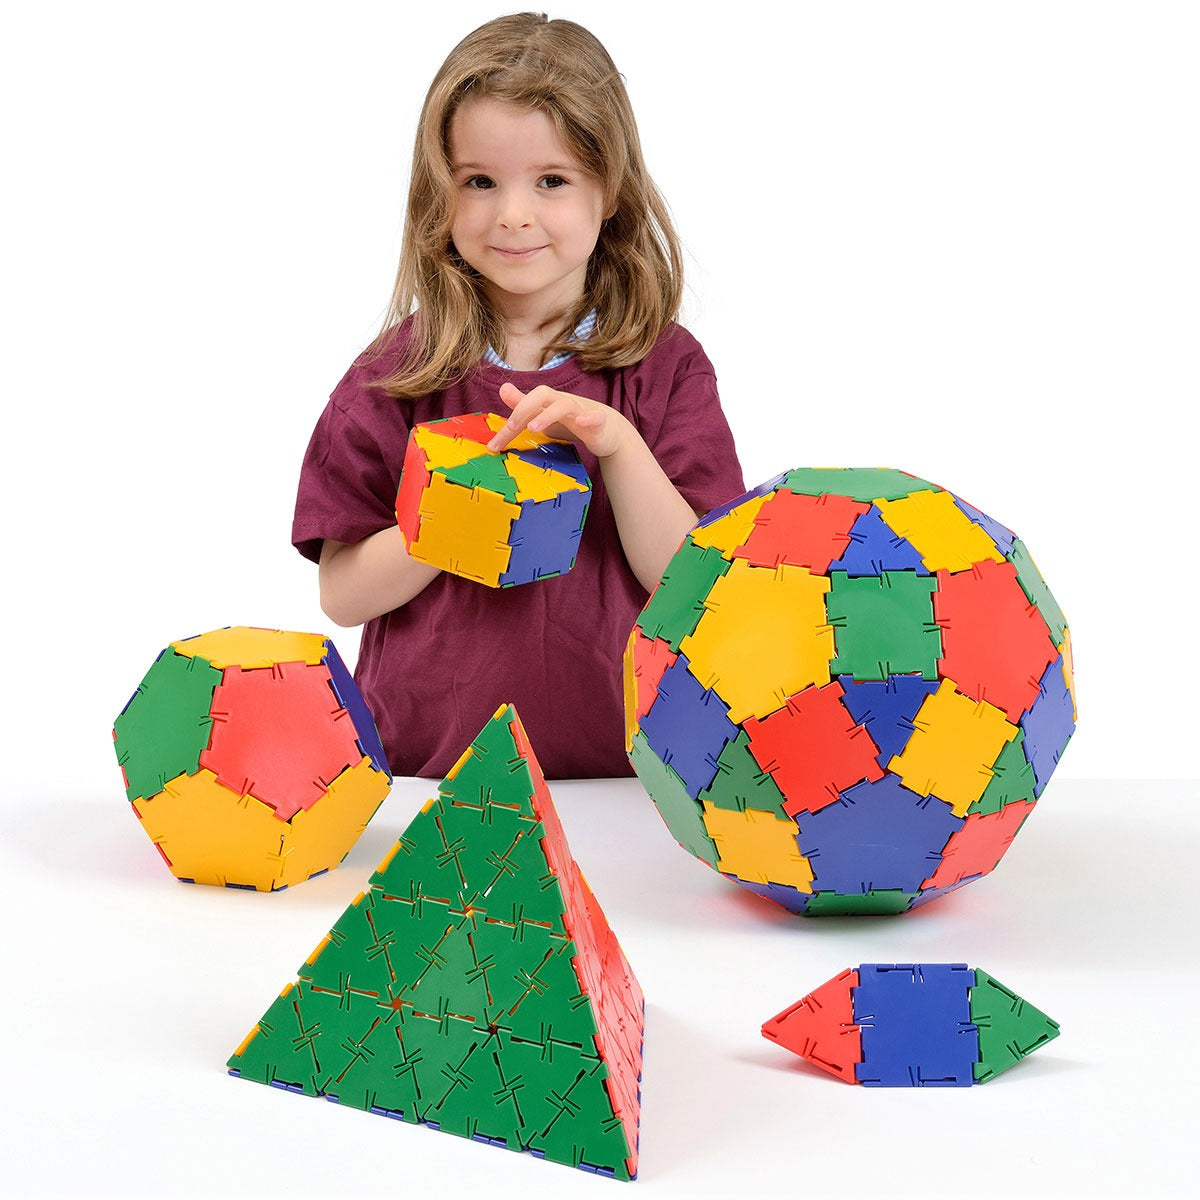 Polydron Basic Set, Polydron is the original and still superior construction shape, recognised in many countries as the world’s leading resource for teaching shape and space; two and three-dimensional geometry, and design and technology. It is used as a major aid for developing spatial awareness and is easily used by children, giving excellent play value, although it is versatile enough to be utilised for complex mathematical theories. The unique joints readily snap together giving a superior hinge. This de